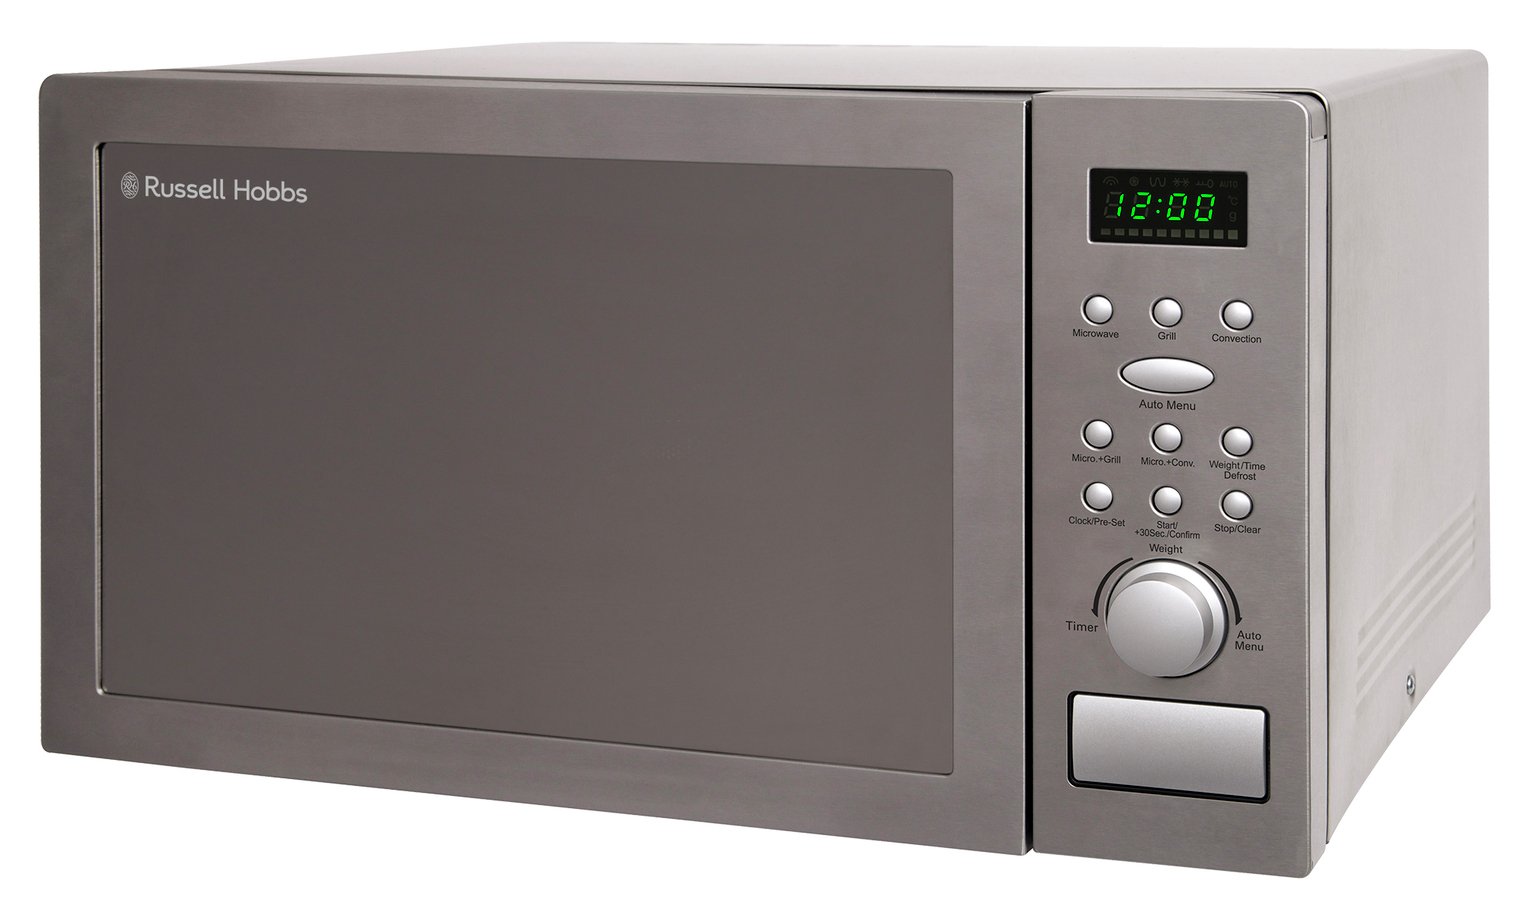 Russell Hobbs 900W Combination Microwave RHM2574 Review